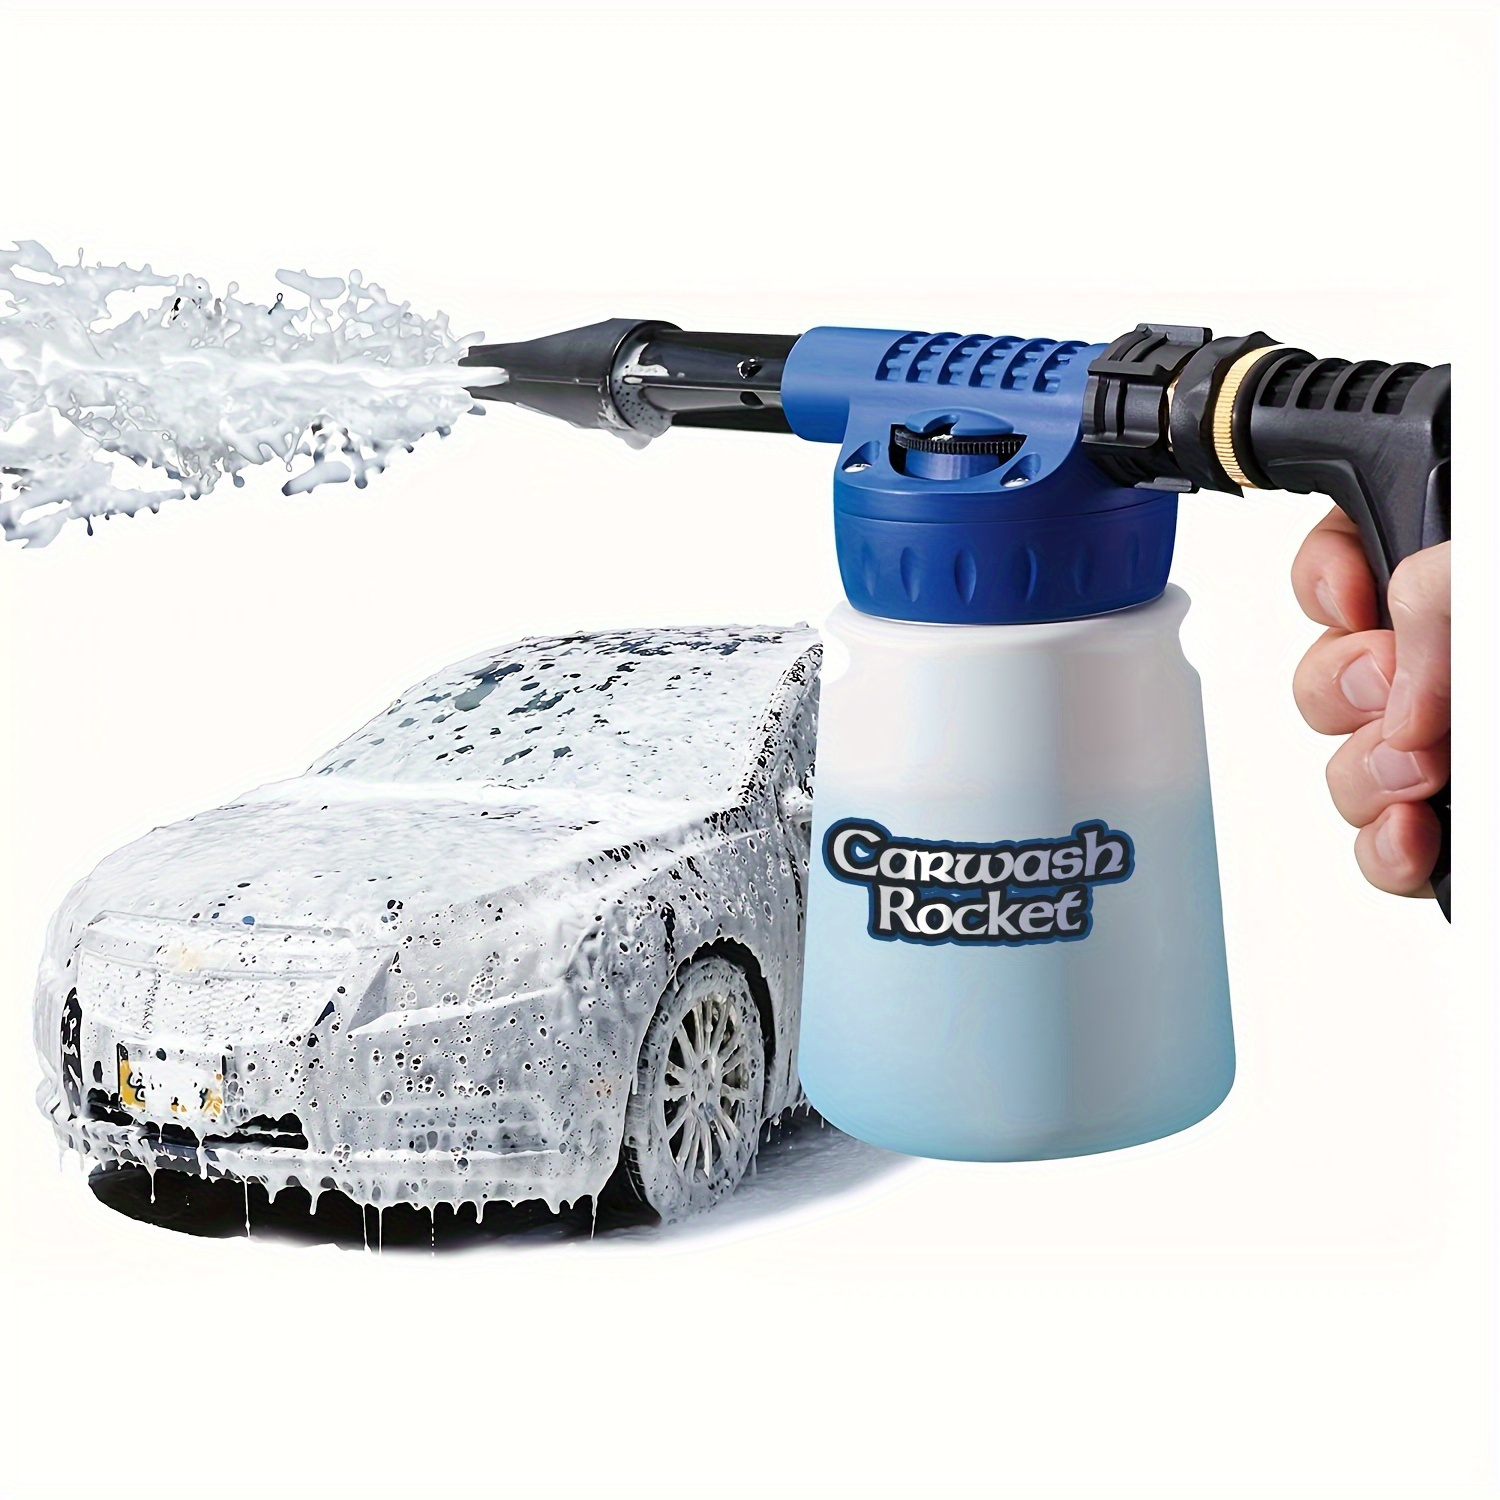 

Adjustable Range Car Wash Gun Foam Jet Nozzle Gun For Cars, Trucks, Boats And More - Just Spray And Rinse, No Residue Or Film